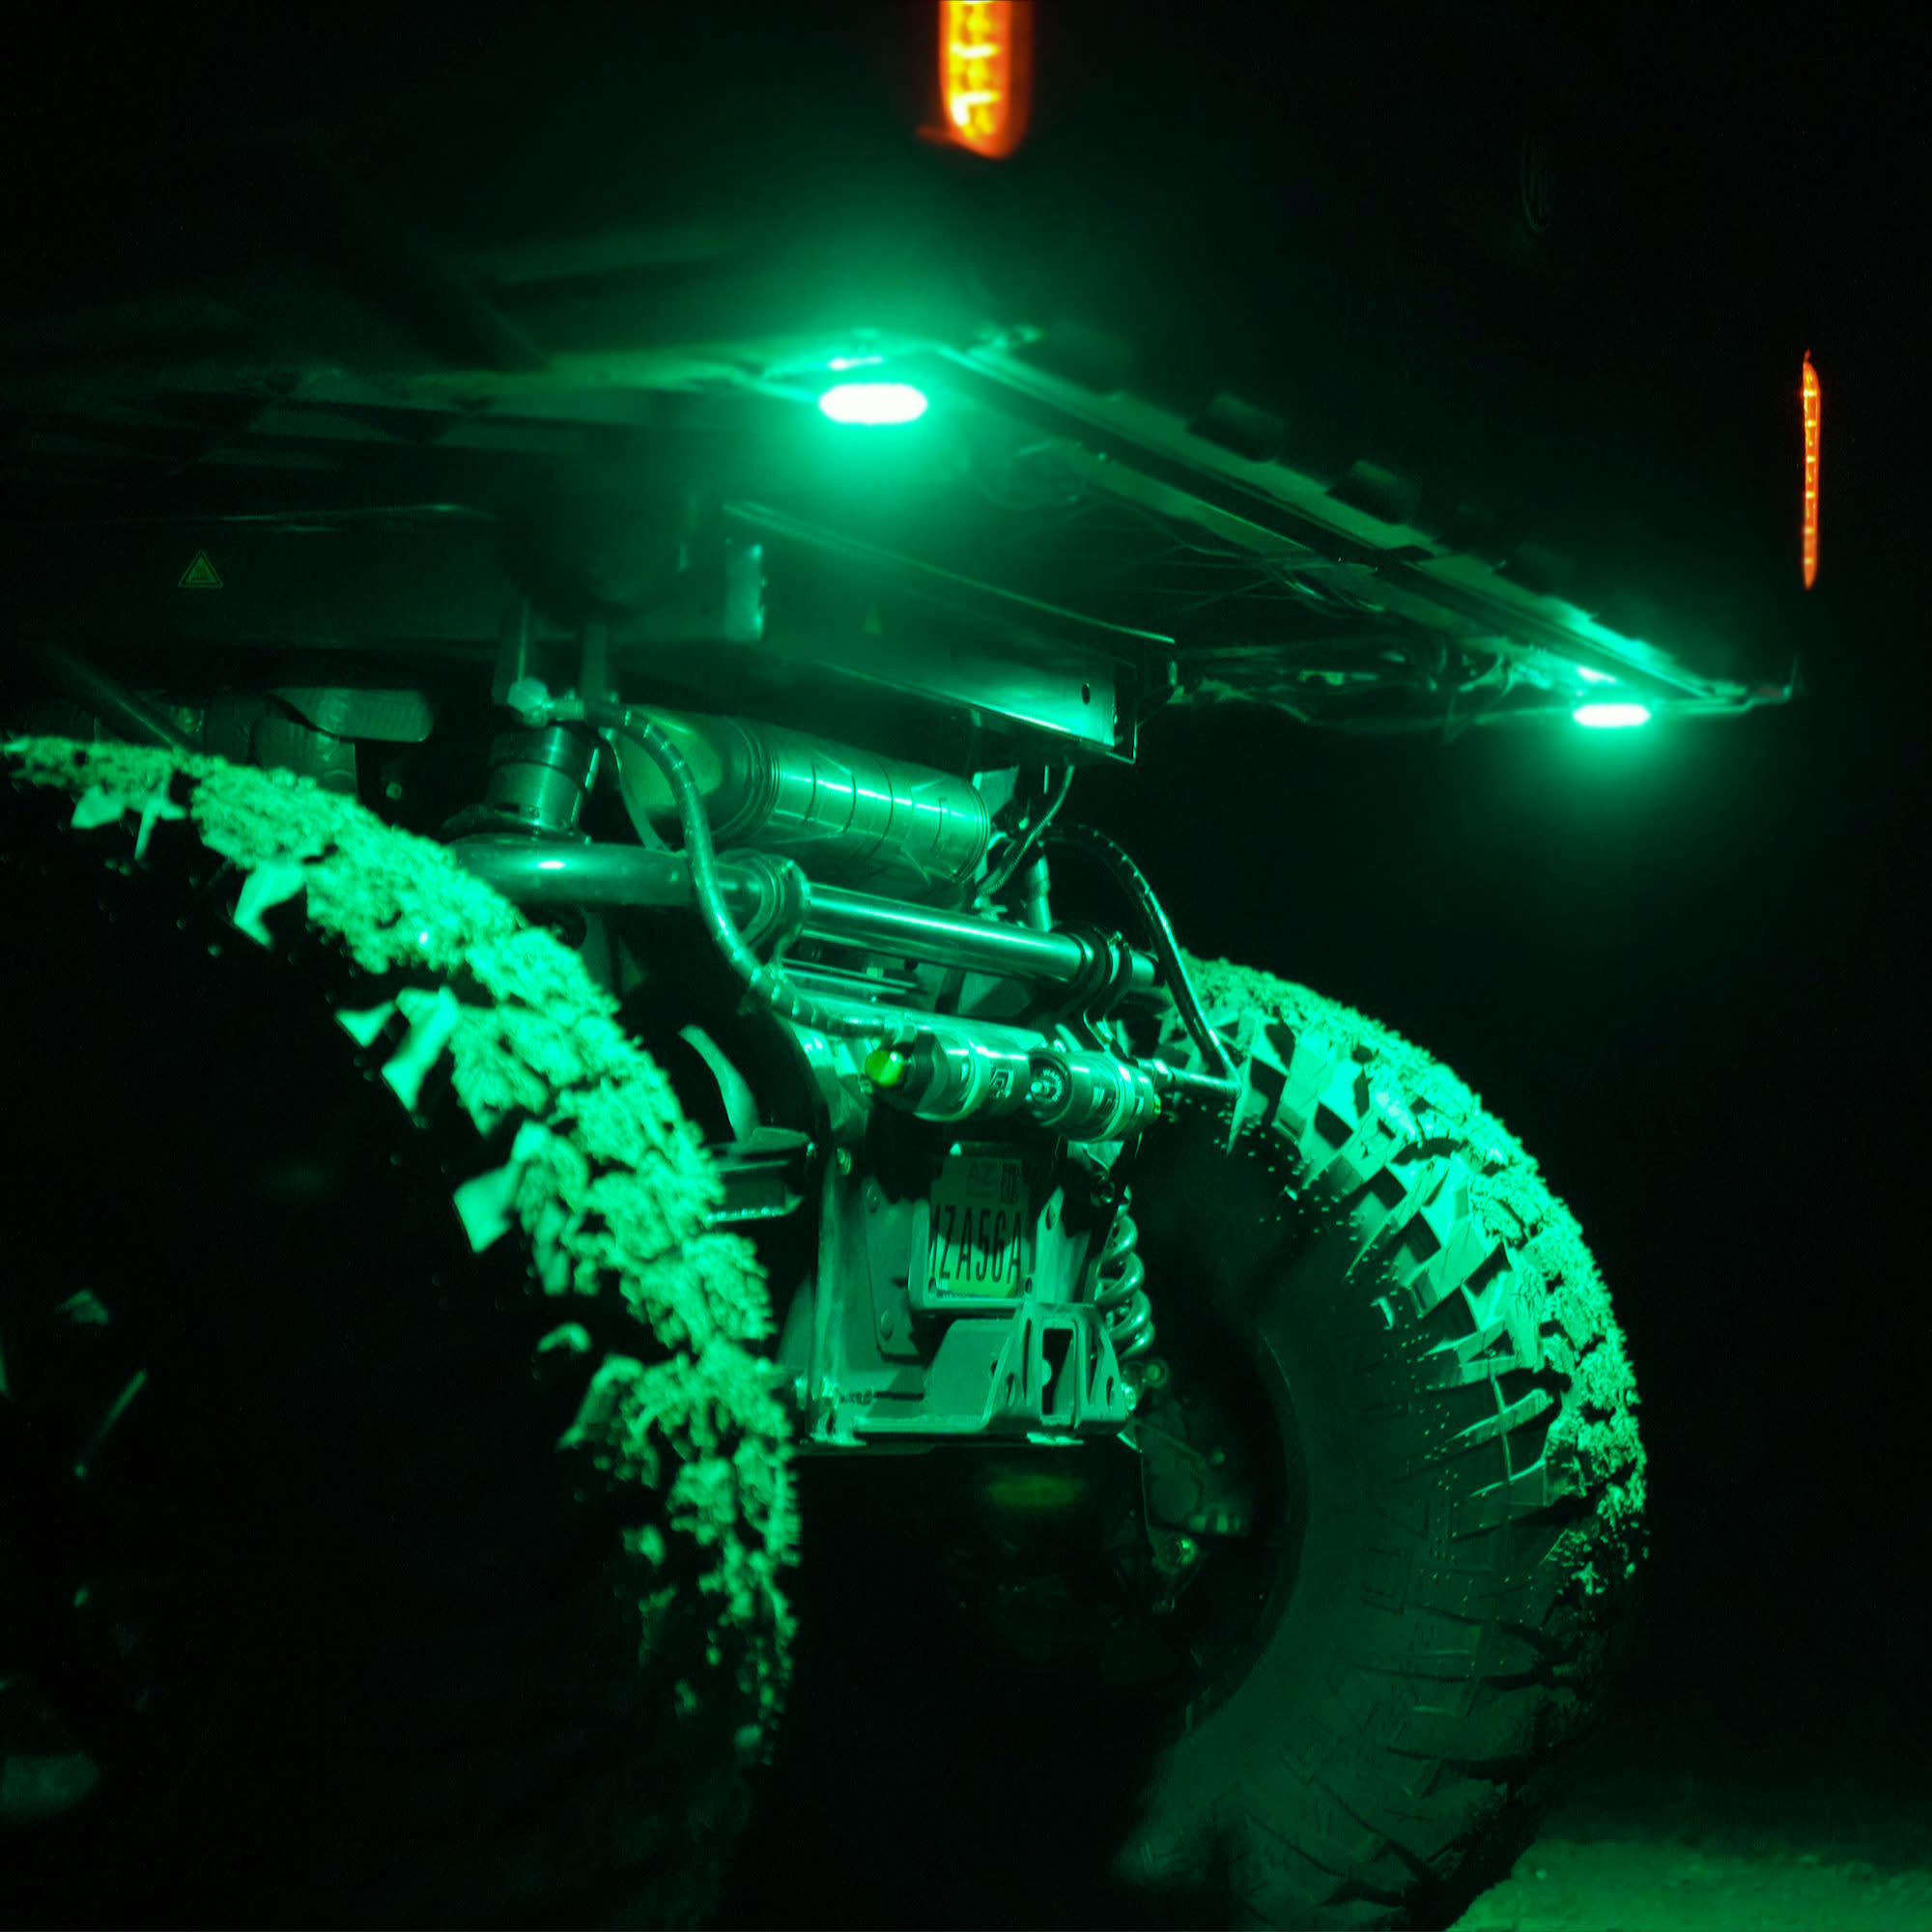 https://www.quadratec.com/sites/default/files/styles/product_zoomed/public/product_images/kc-hilites-cyclone-v2-led-light-kit-green-4415-replacement-cover-installed-utv-rear-quarter-low.jpg